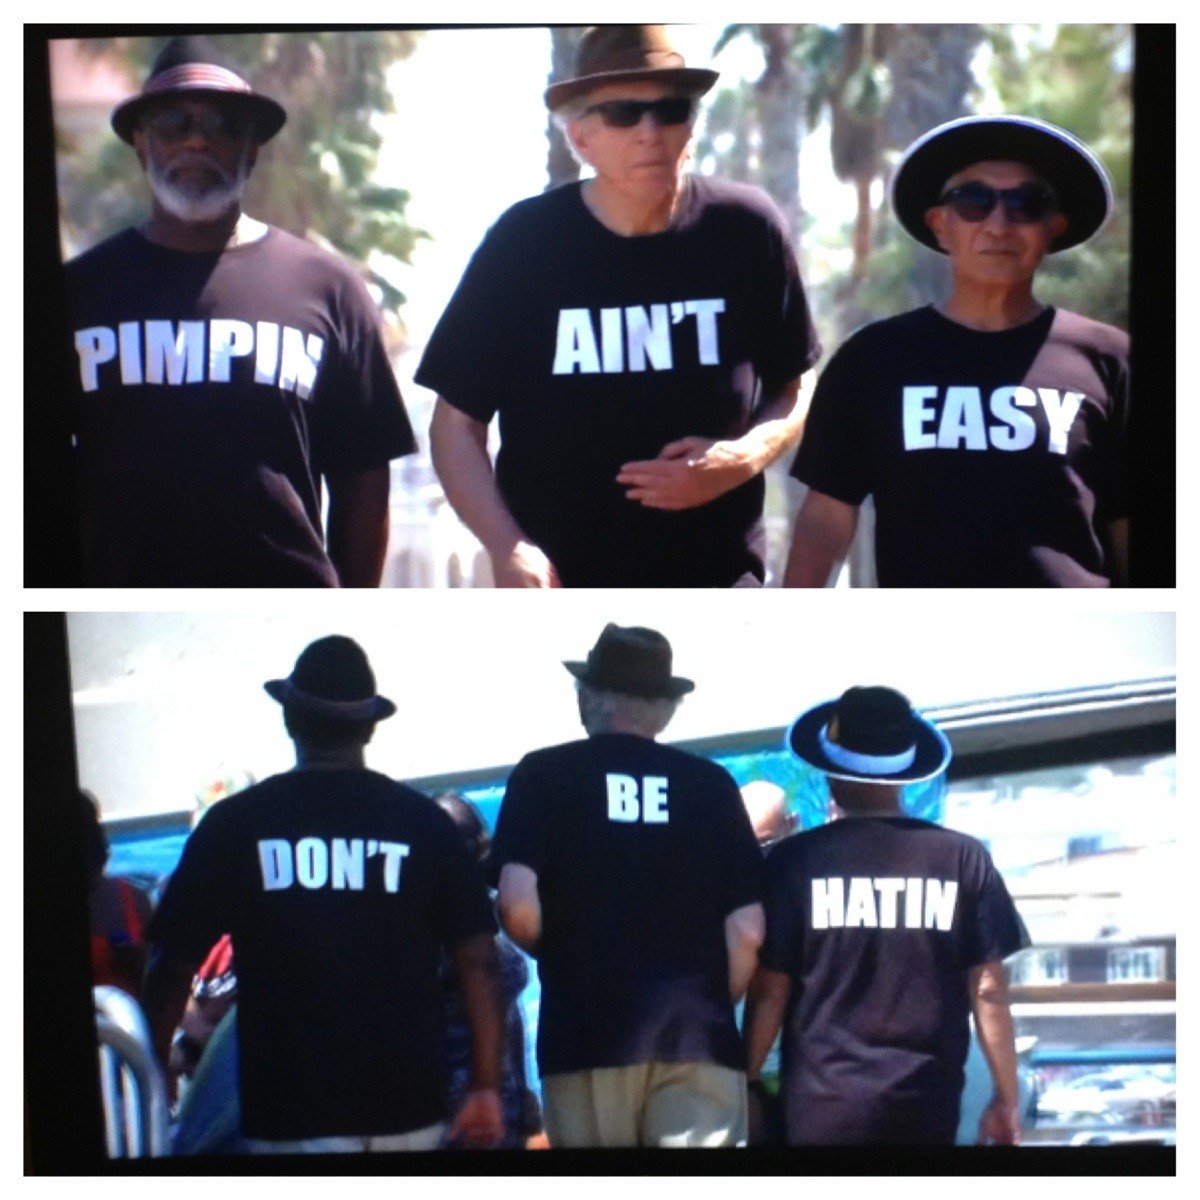 Funny Old Men Wearing Pimpin Ain't Easy Tshirt